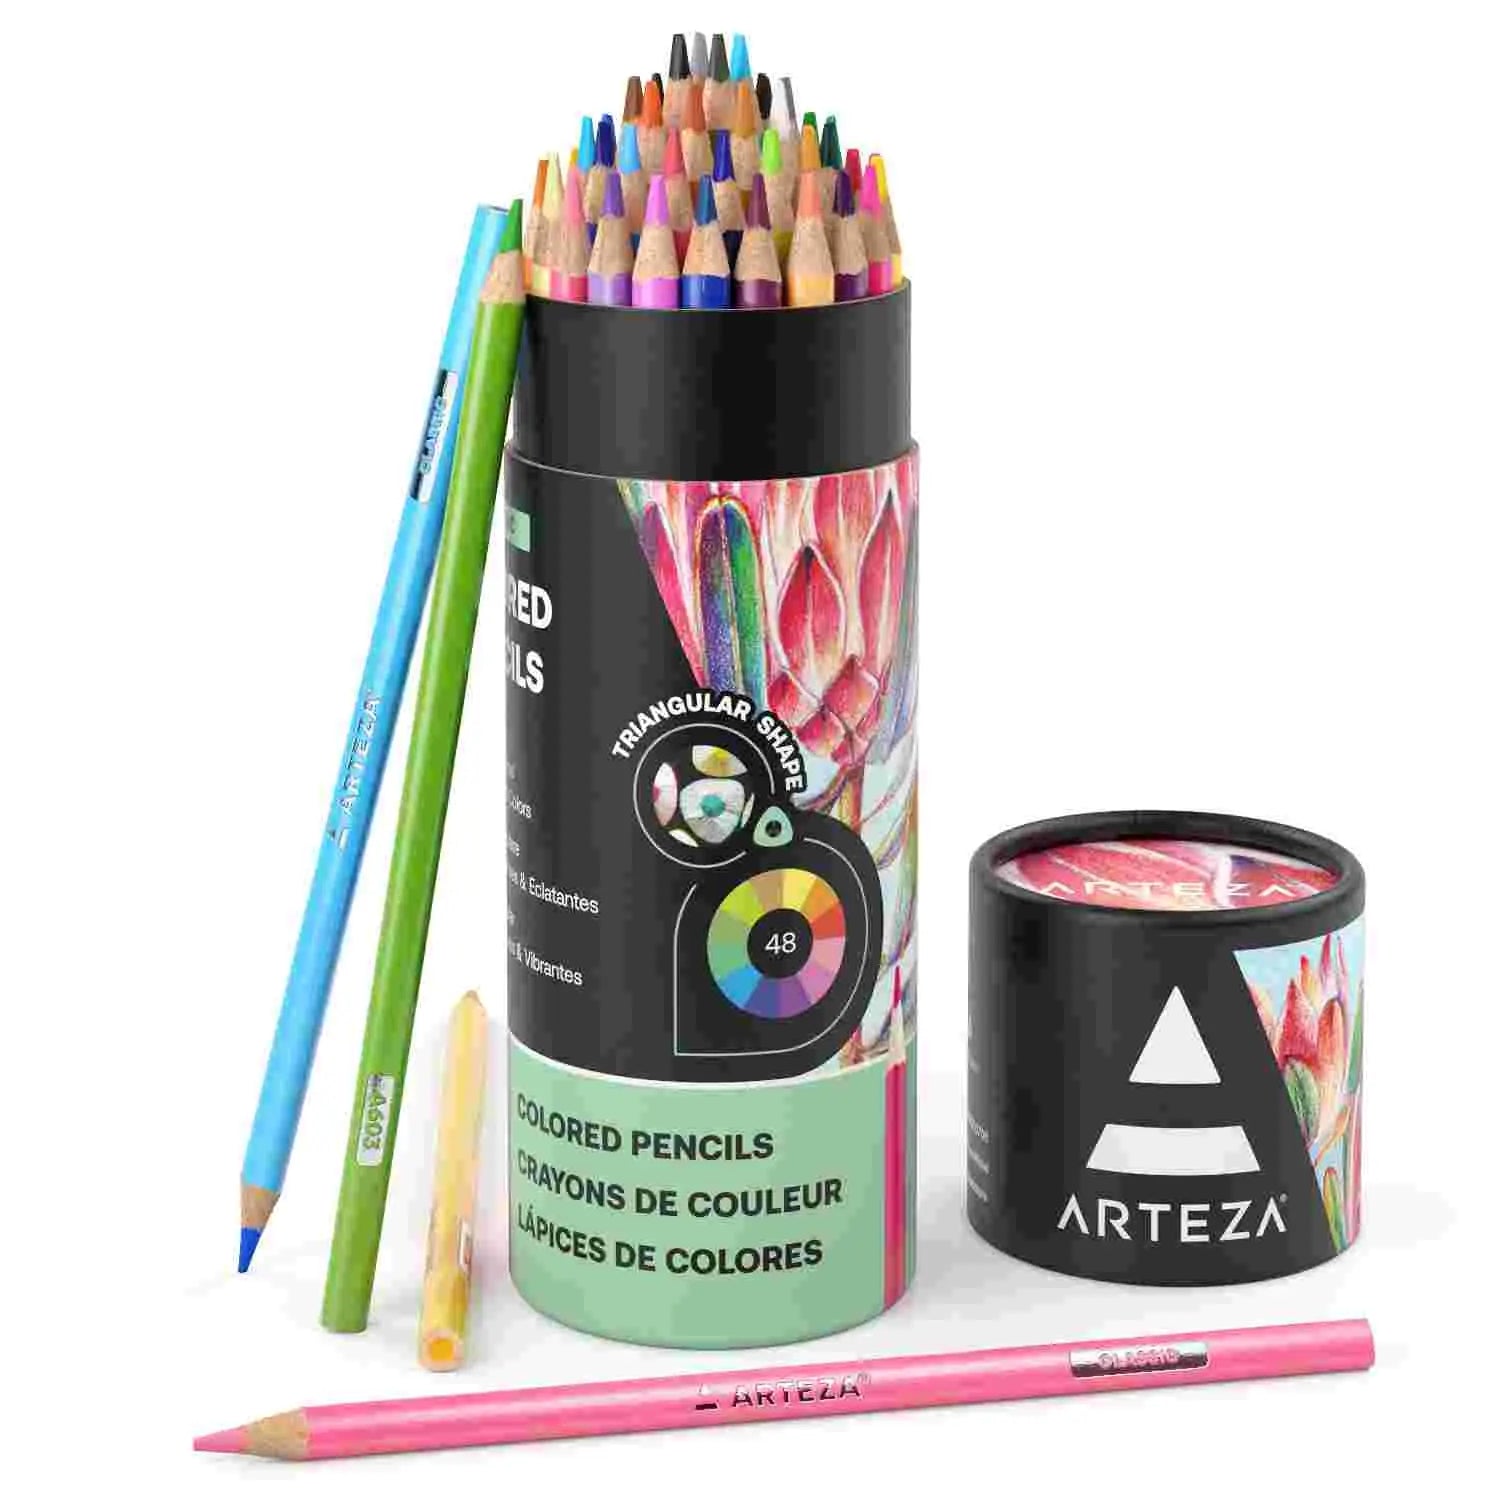 ARTEZA Colored Pencils for Adult Coloring, 48 Colors, Soft Drawing Pencils, Highly-Pigmented, Wax-Based Core, Professional Art Supplies for Artists, Pencil Set for Adults and Teens Arteza